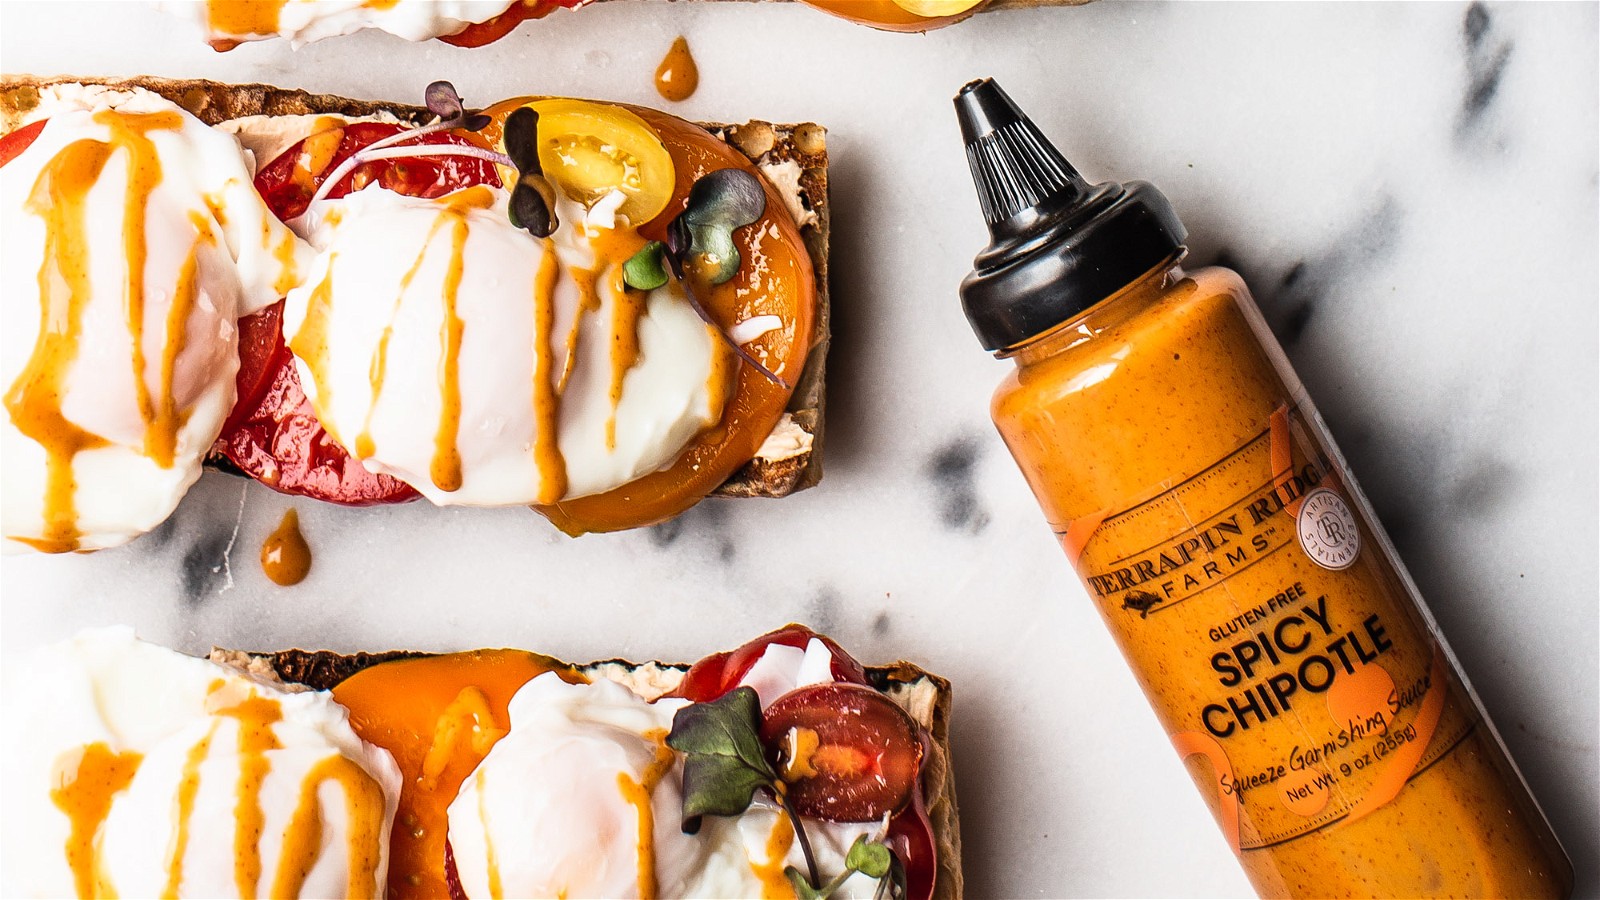 Image of Chipotle Eggs Benedict with Goat Cheese Spread